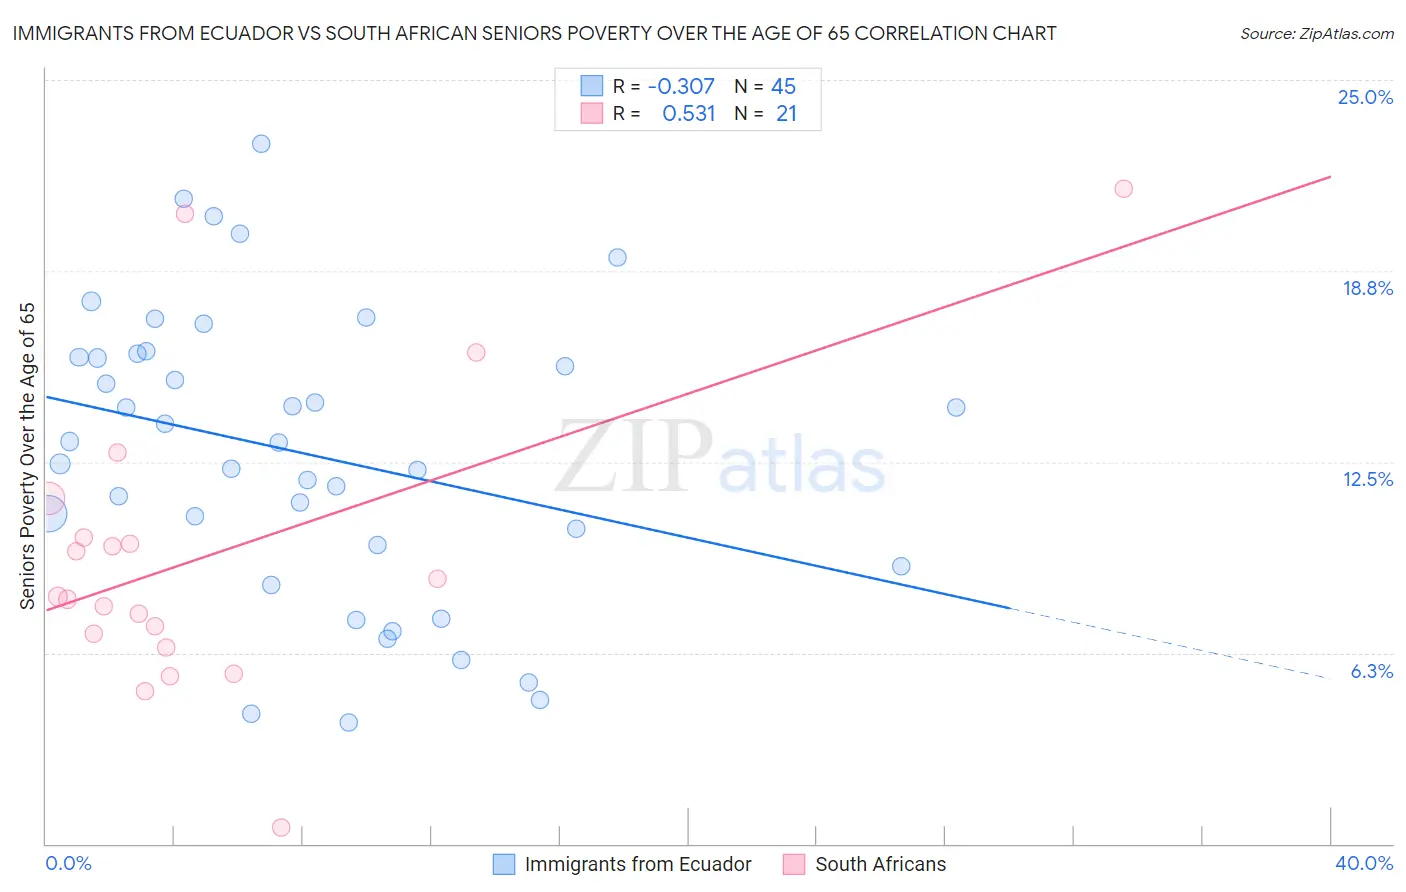 Immigrants from Ecuador vs South African Seniors Poverty Over the Age of 65